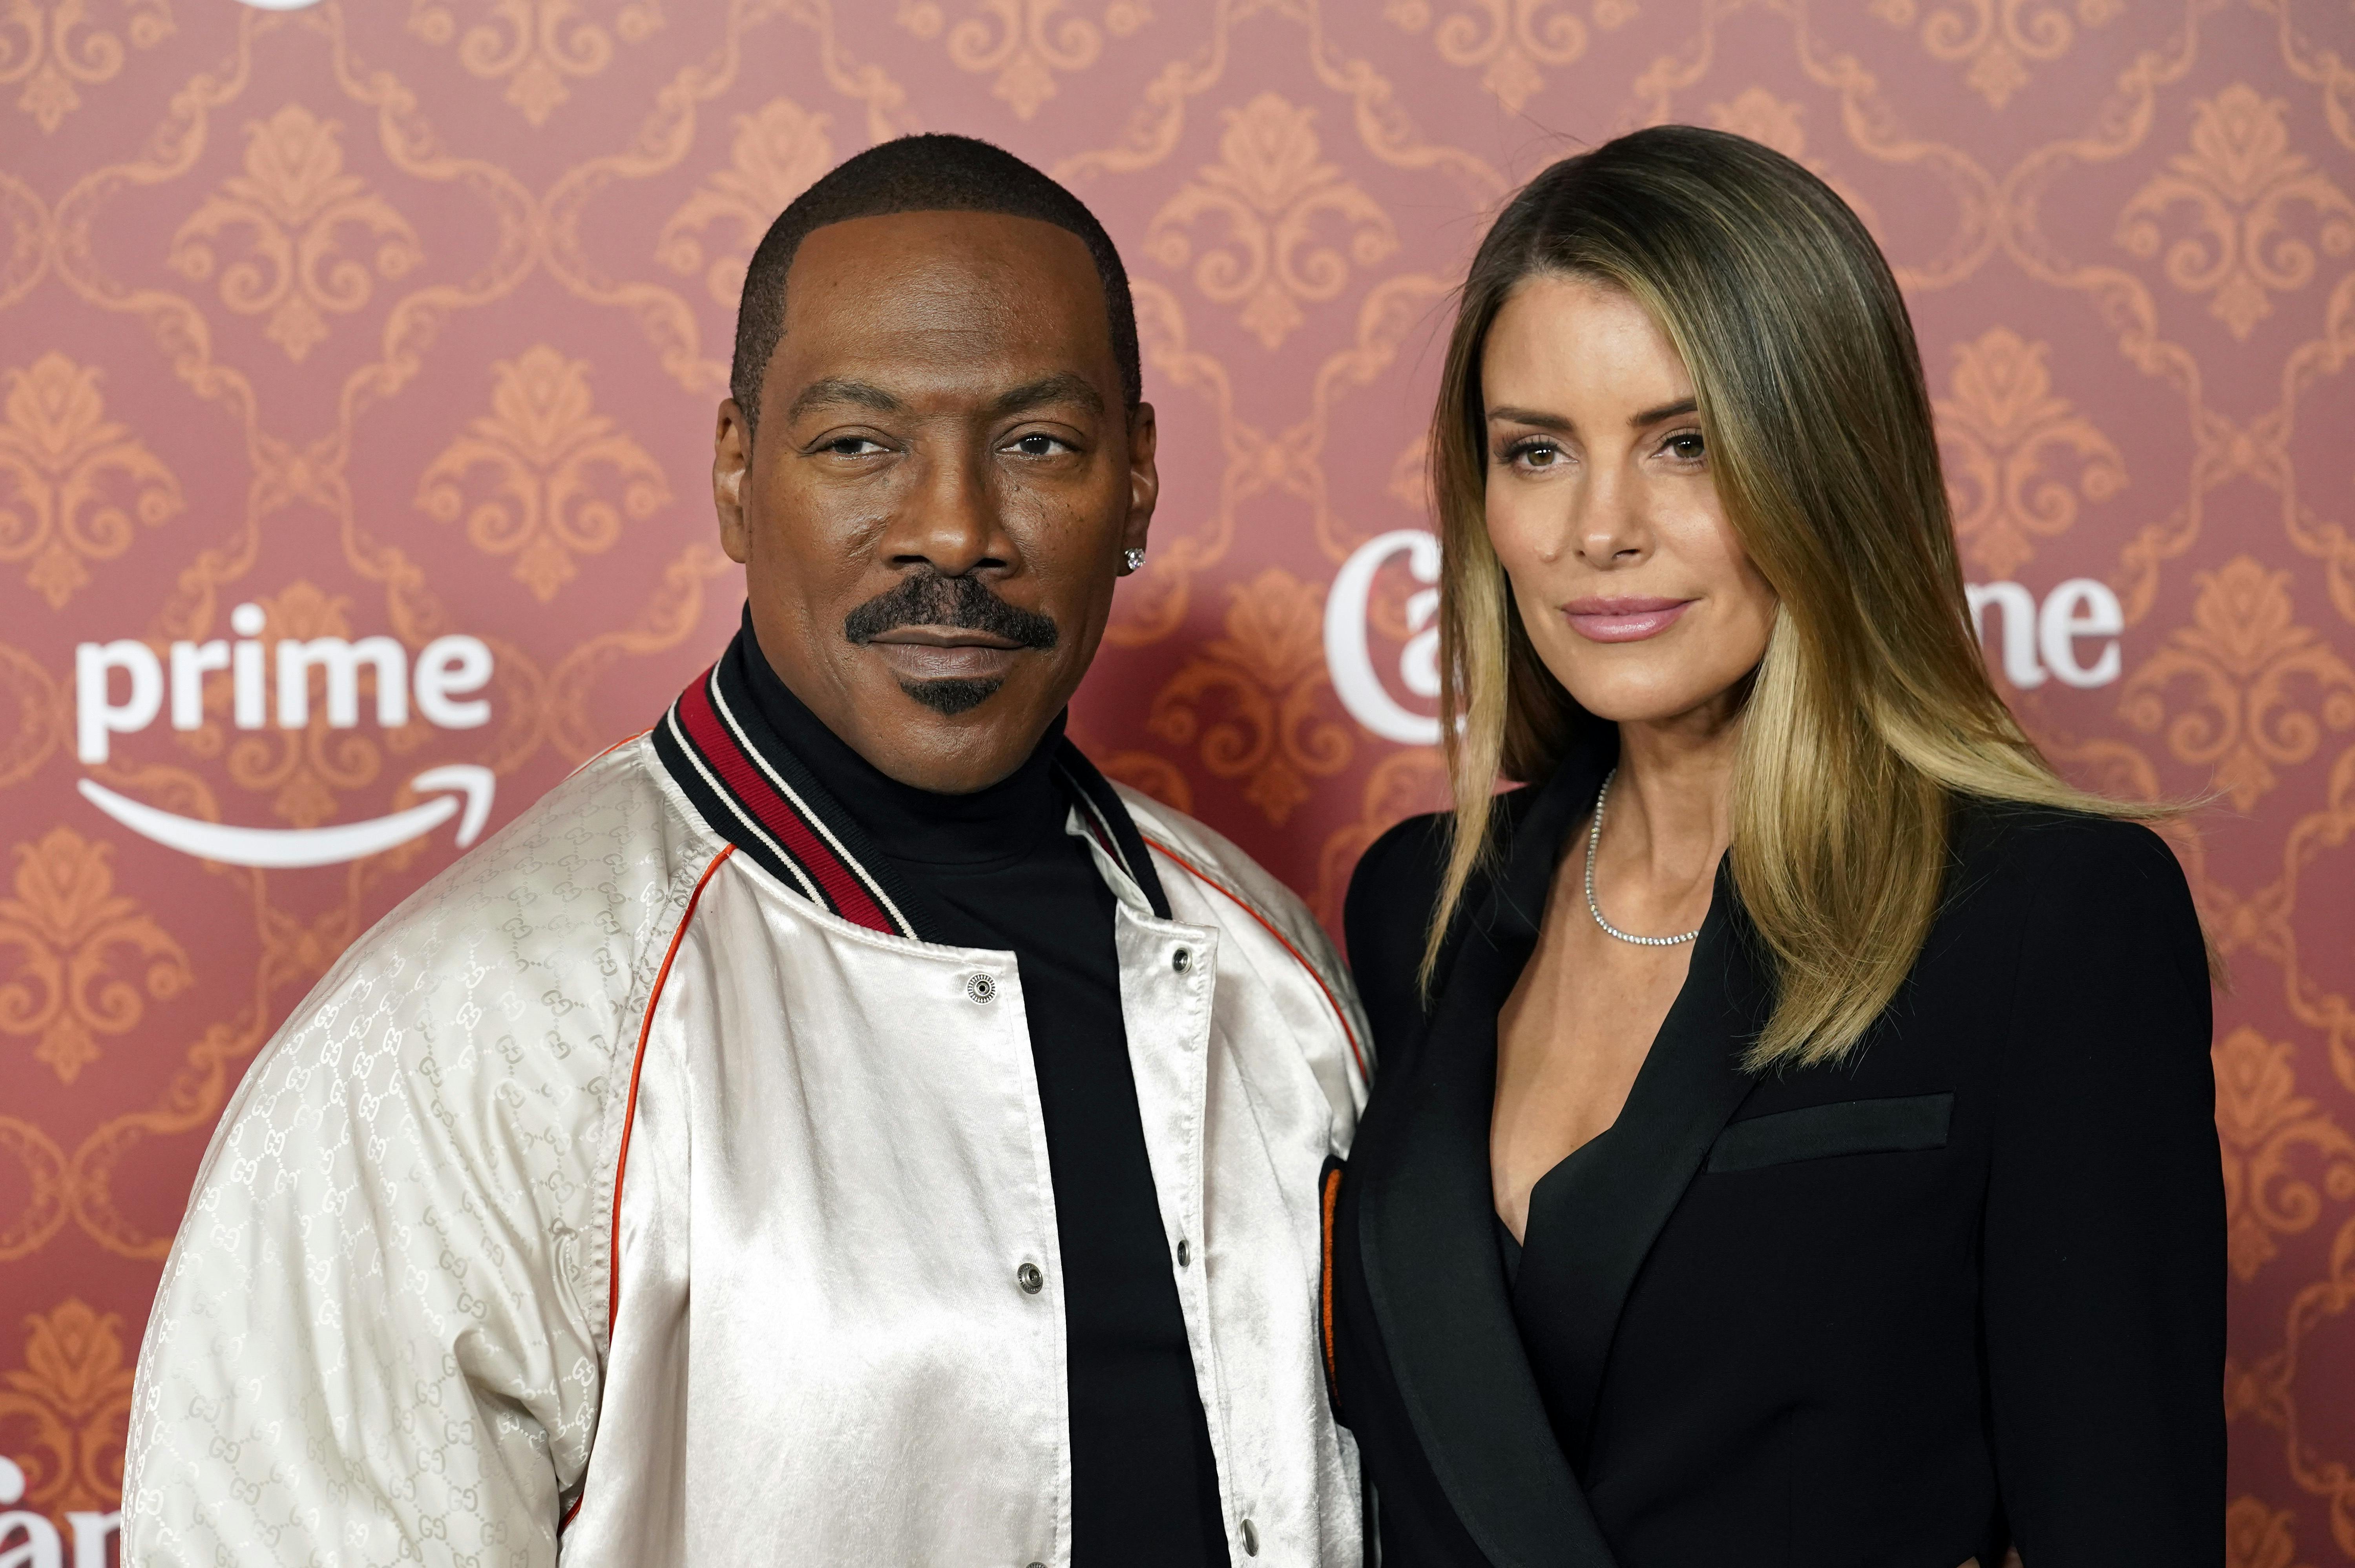 Eddie Murphy and Paige Butcher pose together at the premiere of the film "Candy Cane Lane" at the Regency Village Theatre, Tuesday, Nov. 28, 2023, in Los Angeles. (AP Photo/Chris Pizzello)